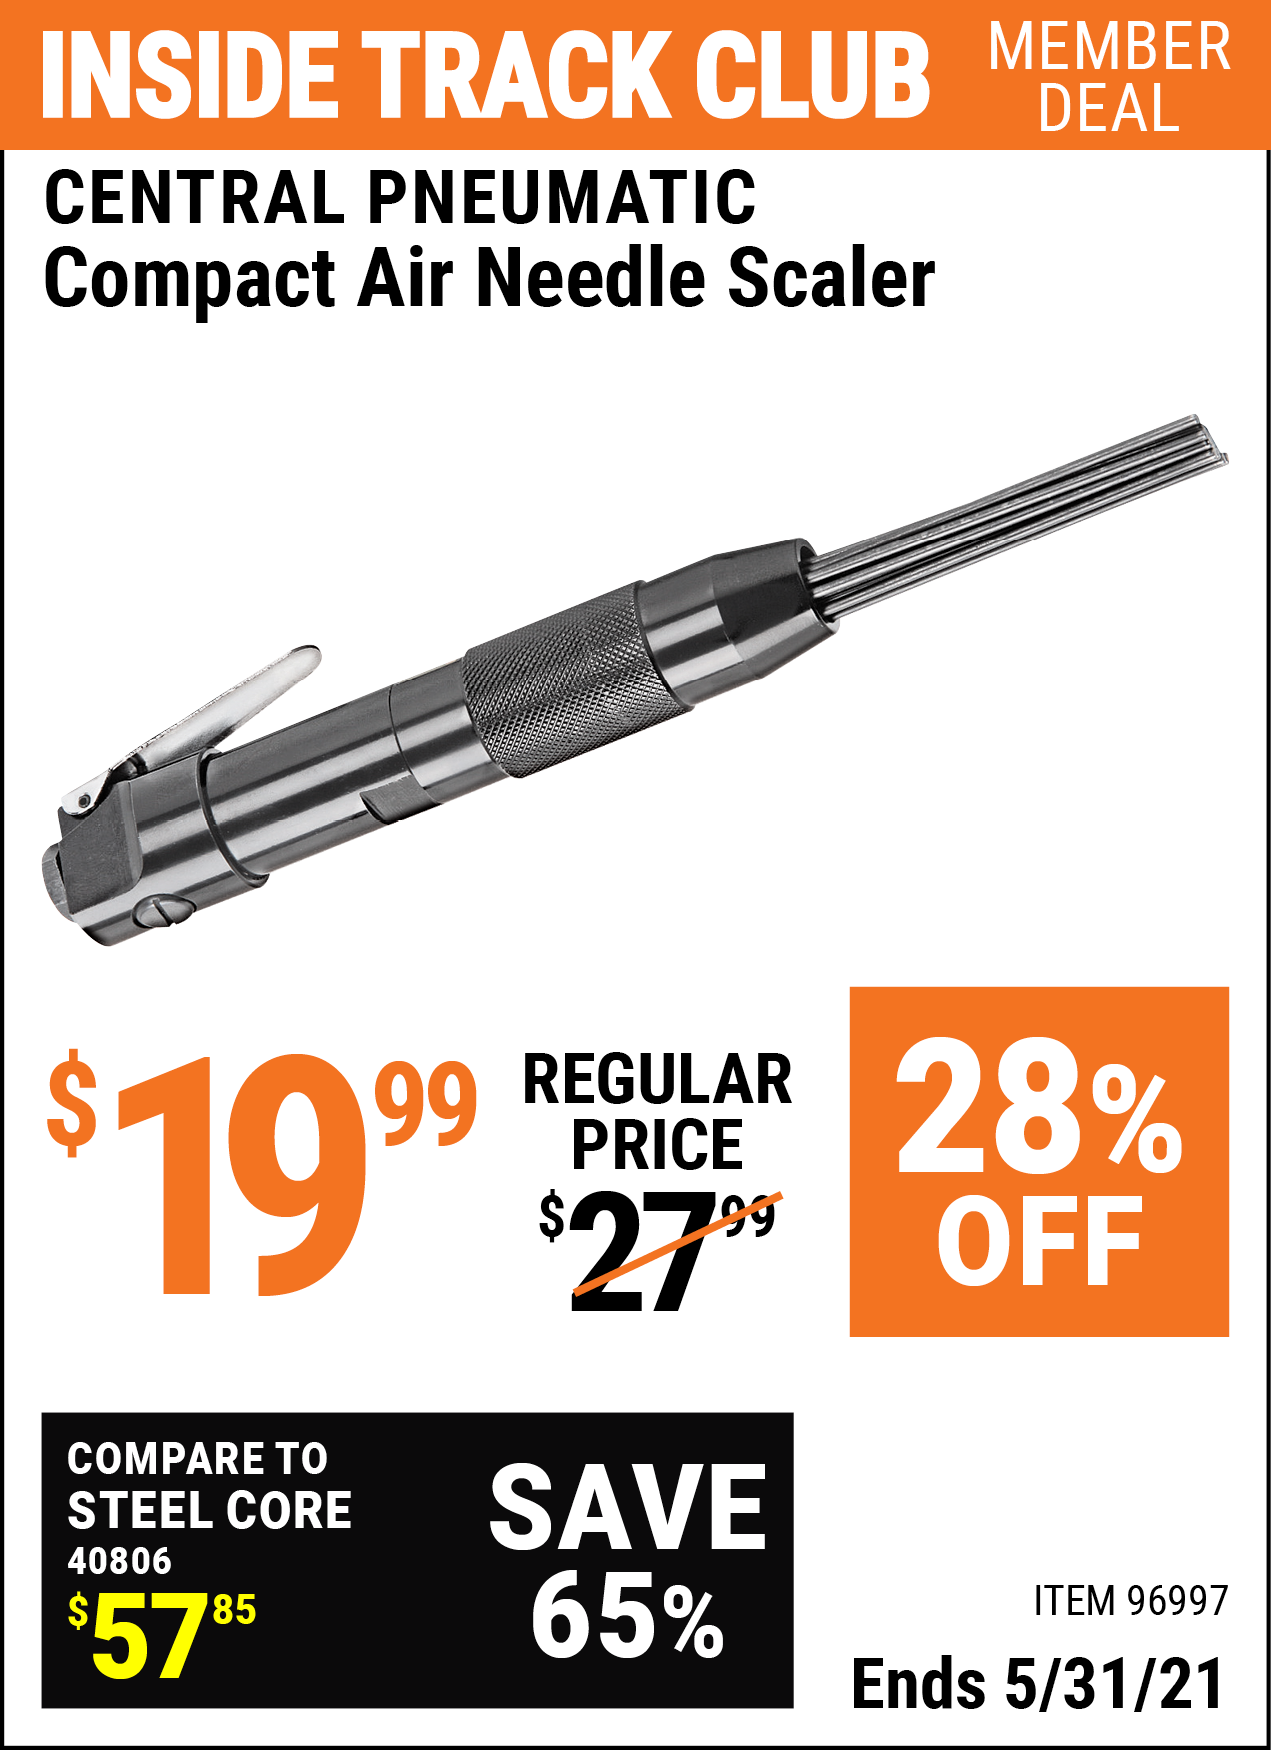 Inside Track Club members can buy the CENTRAL PNEUMATIC Compact Air Needle Scaler (Item 96997) for $19.99, valid through 5/31/2021.